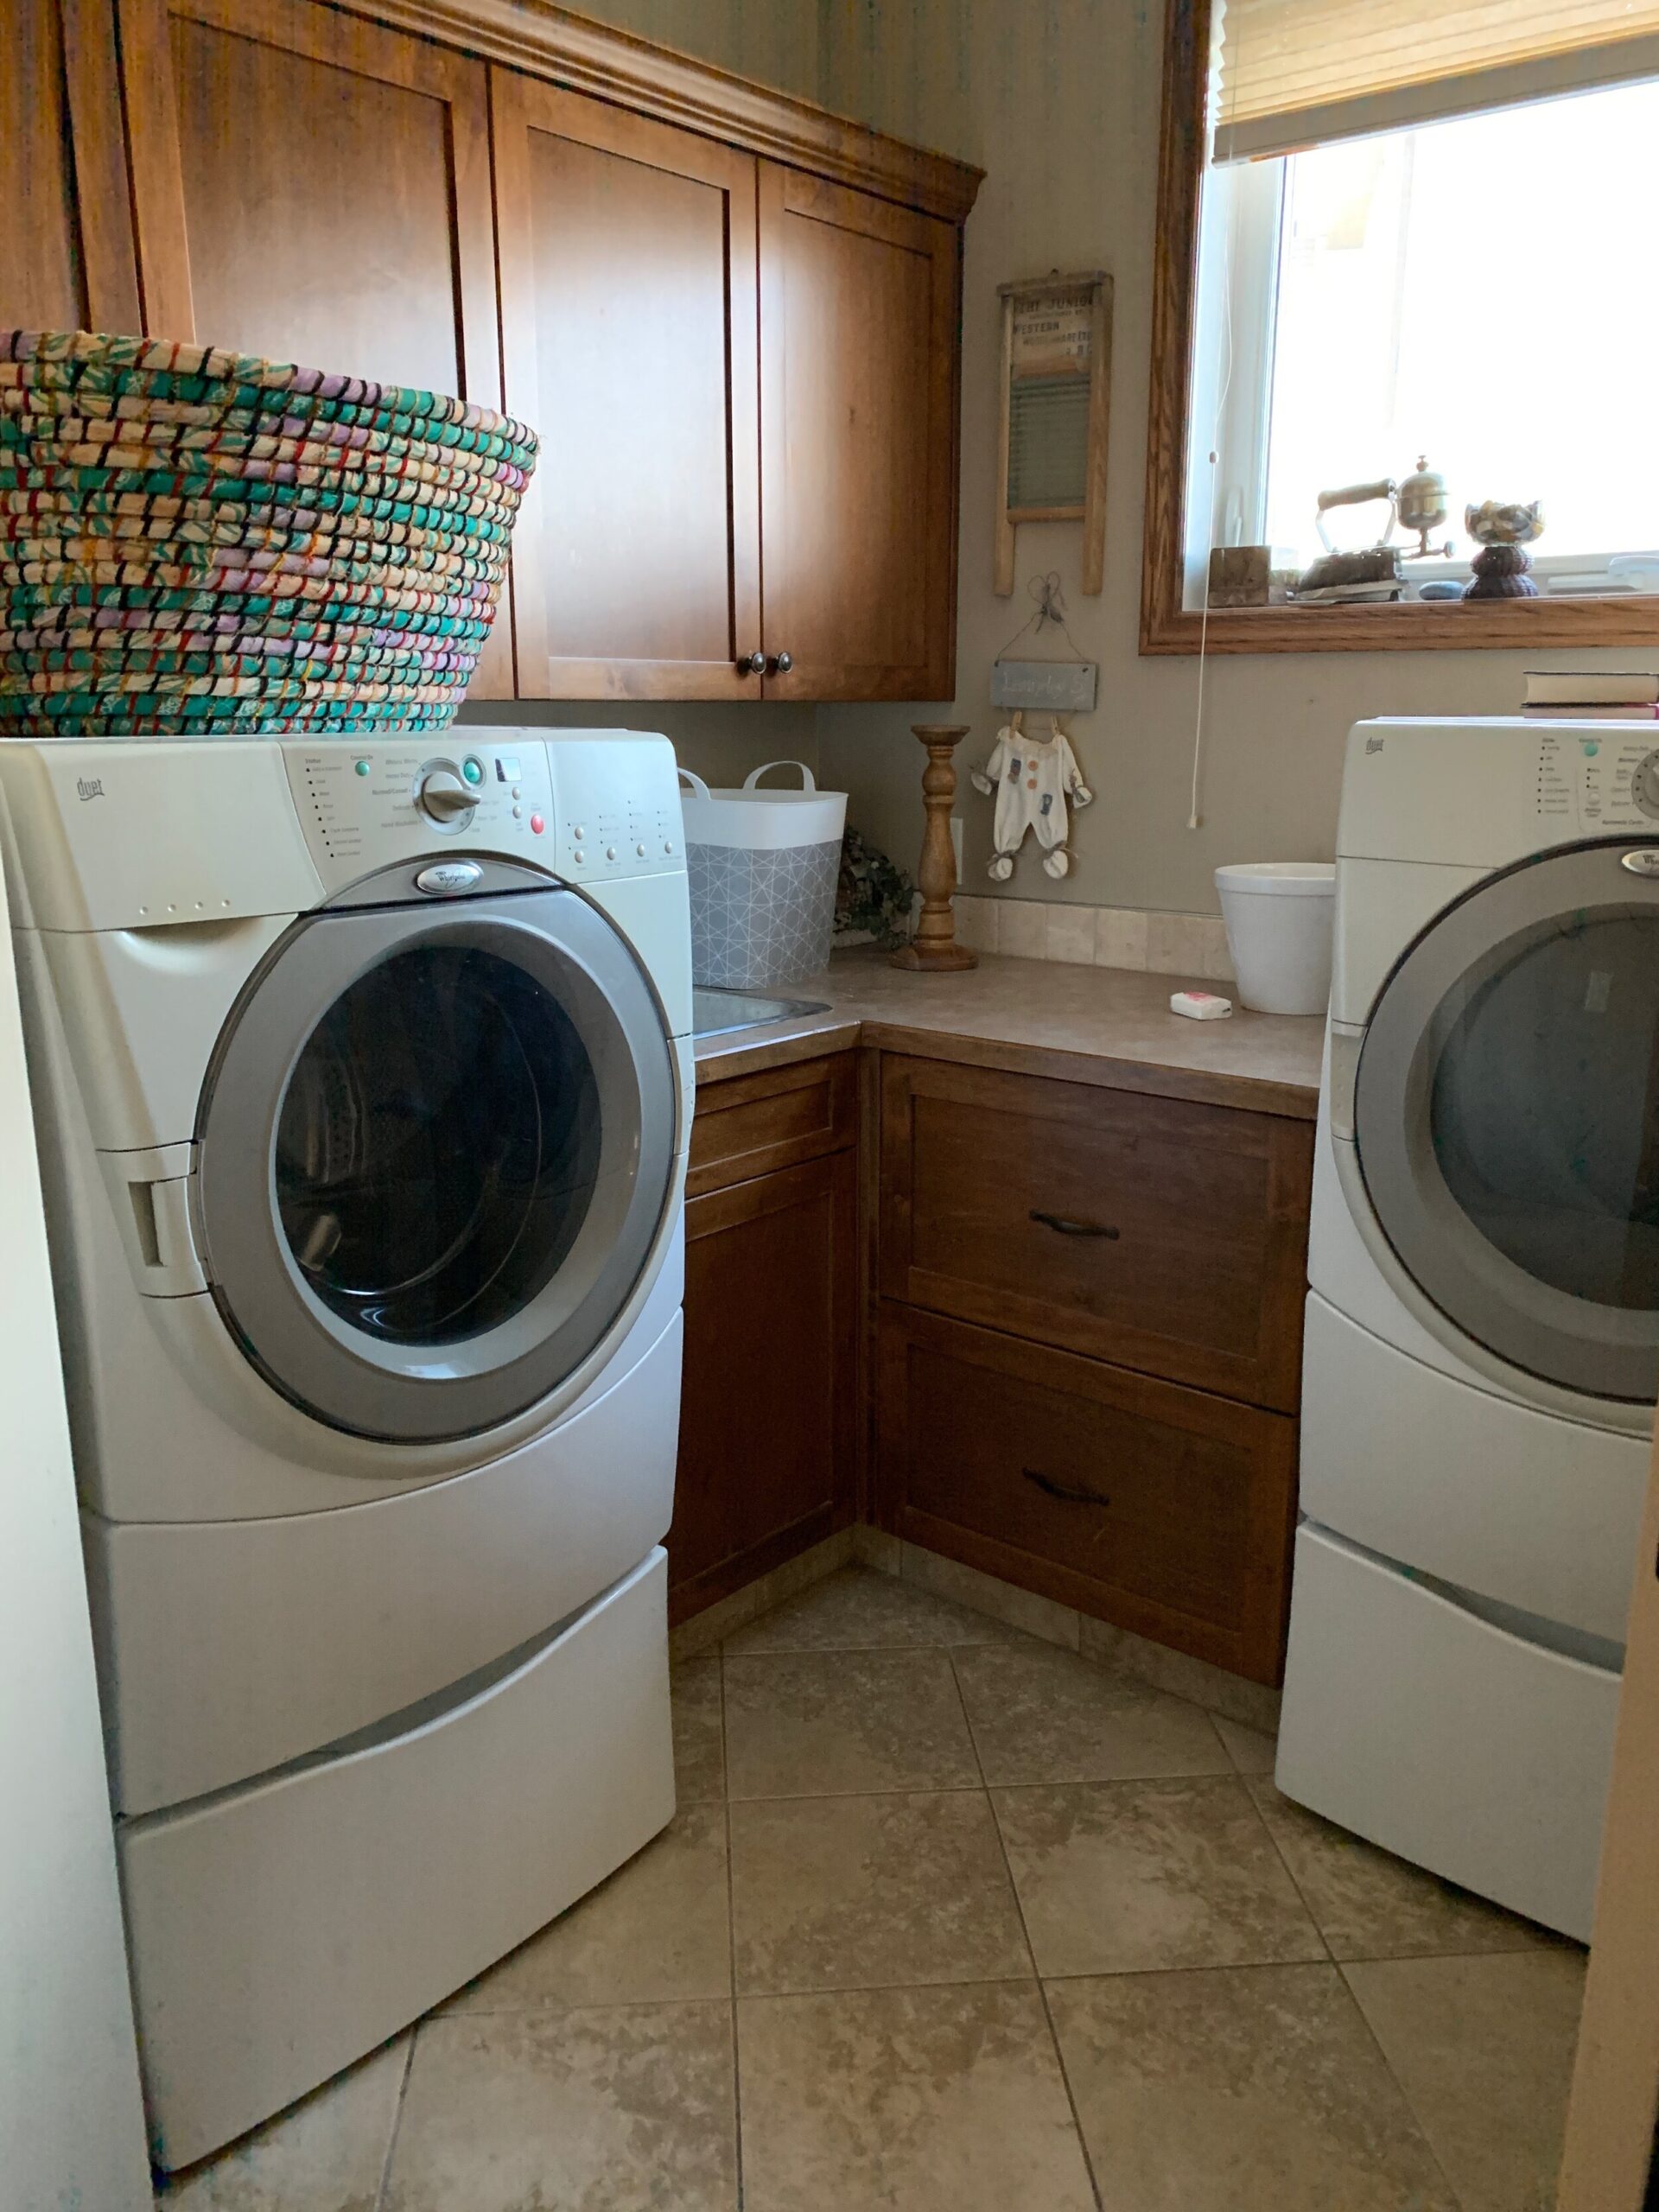 laundry room with brown wood cabinets, brown walls, brown lino counters, brown tile floor, a window and a washer dryer